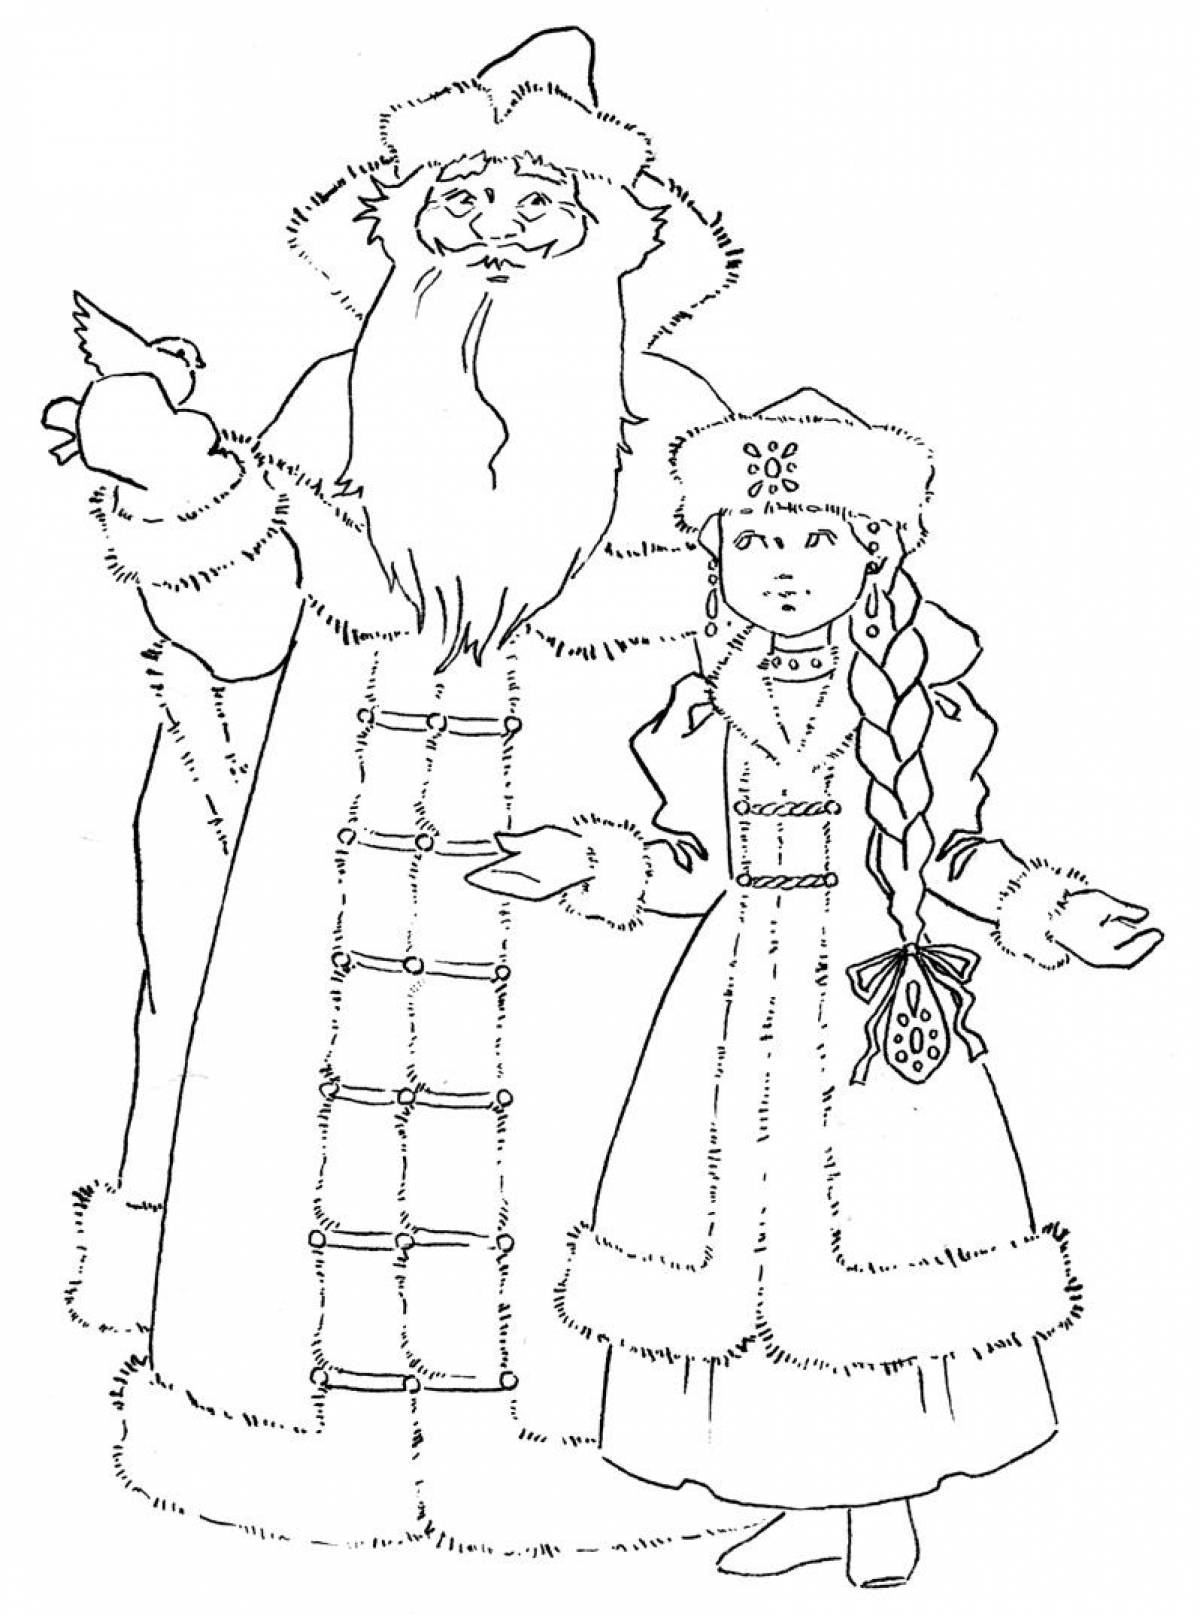 Santa Claus and Snow Maiden coloring pages